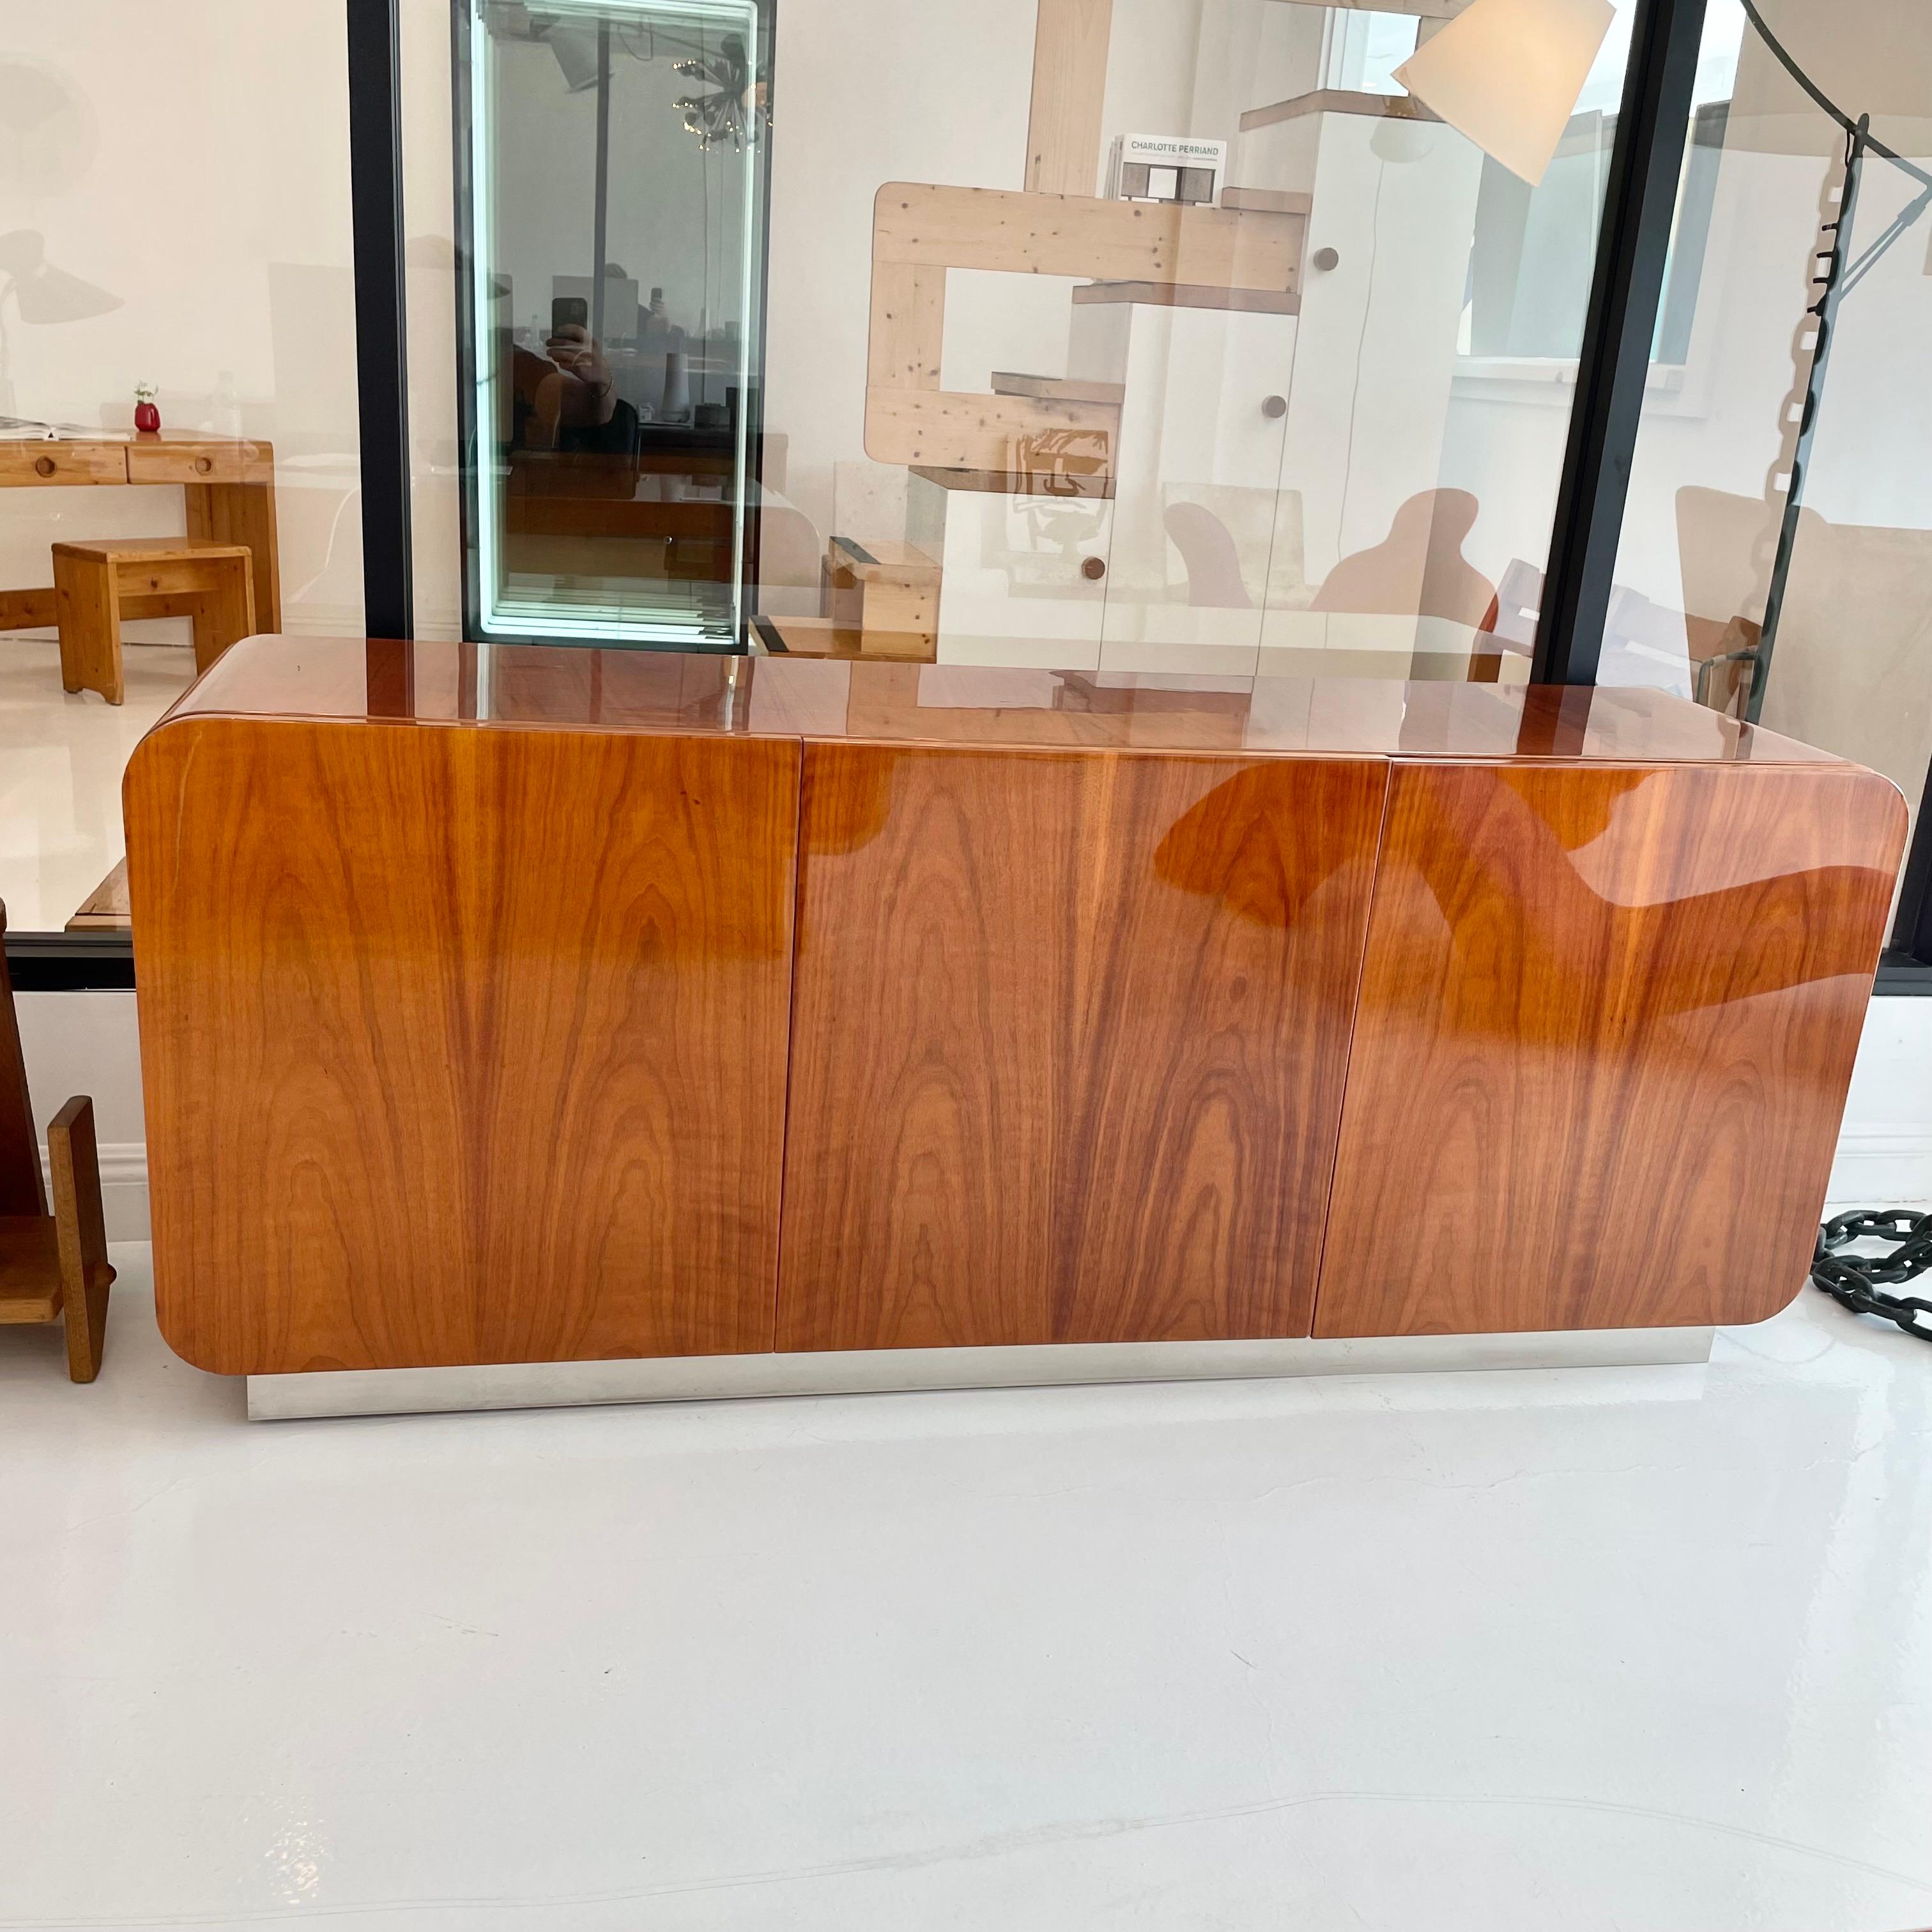 Recently restored and refinished exquisite Pau Ferro hardwood credenza by Irving Rosen for the Pace Collection circa 1974 with rounded waterfall corners and a polished chrome base. 

Stunning grain patterning in the Pau Ferro hardwood with a high